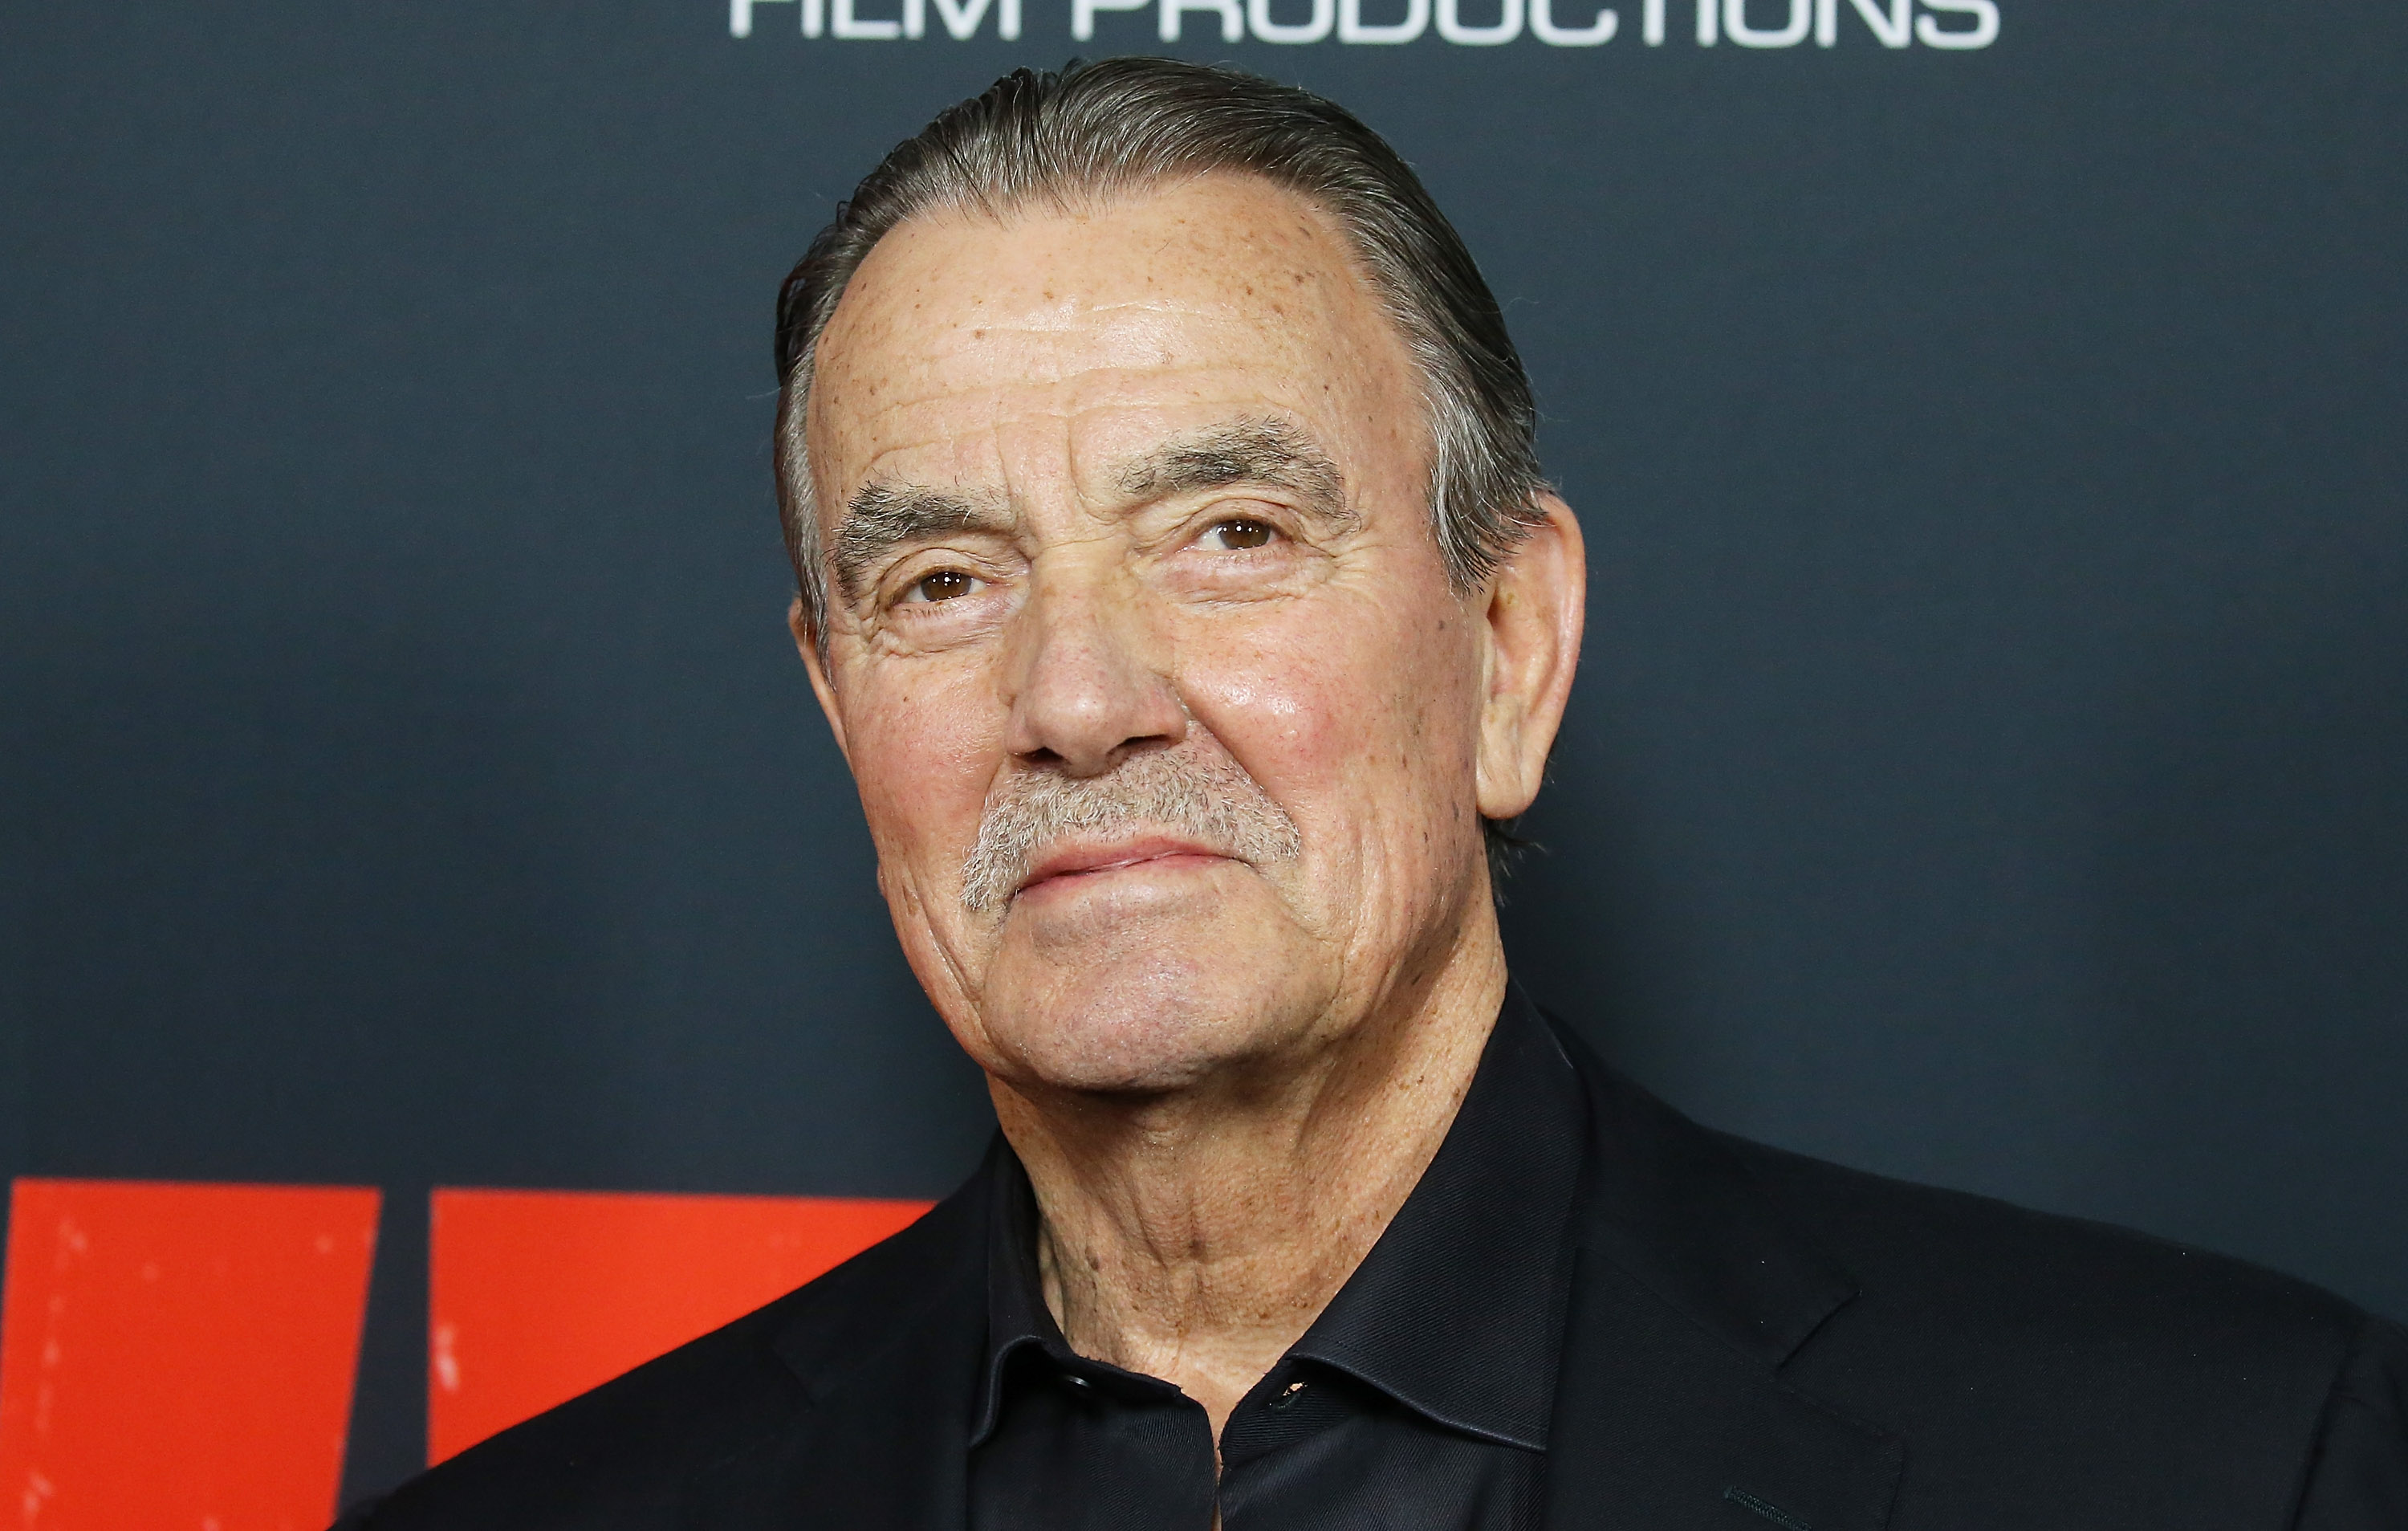 'The Young and the Restless' actor Eric Braeden wearing a black suit during a red carpet appearance.